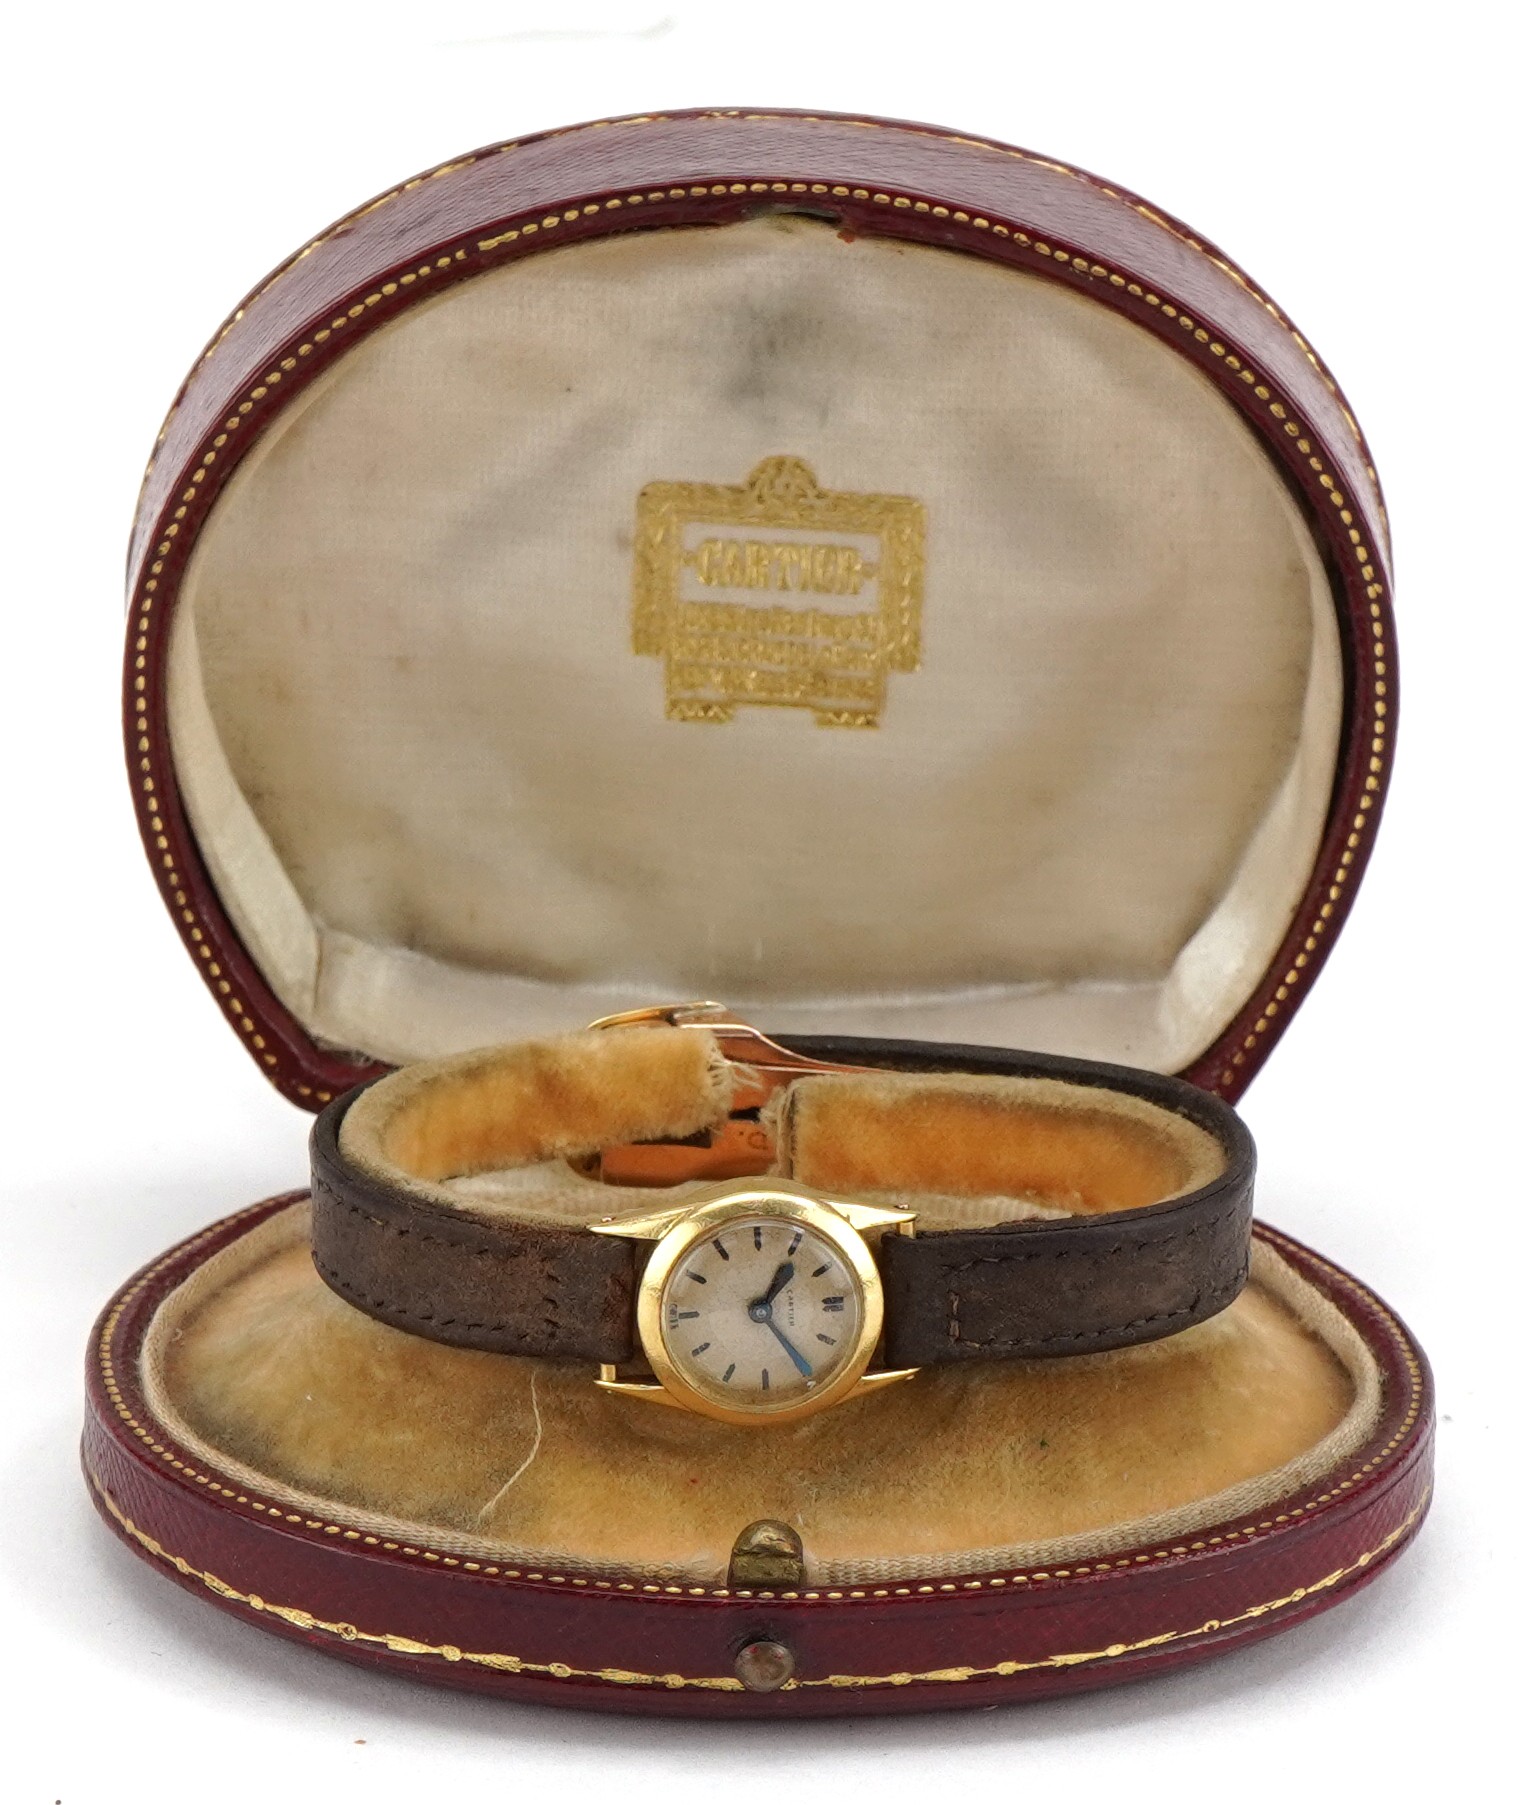 Cartier, early 20th century ladies gold Cartier wristwatch with leather strap and 18ct gold strap